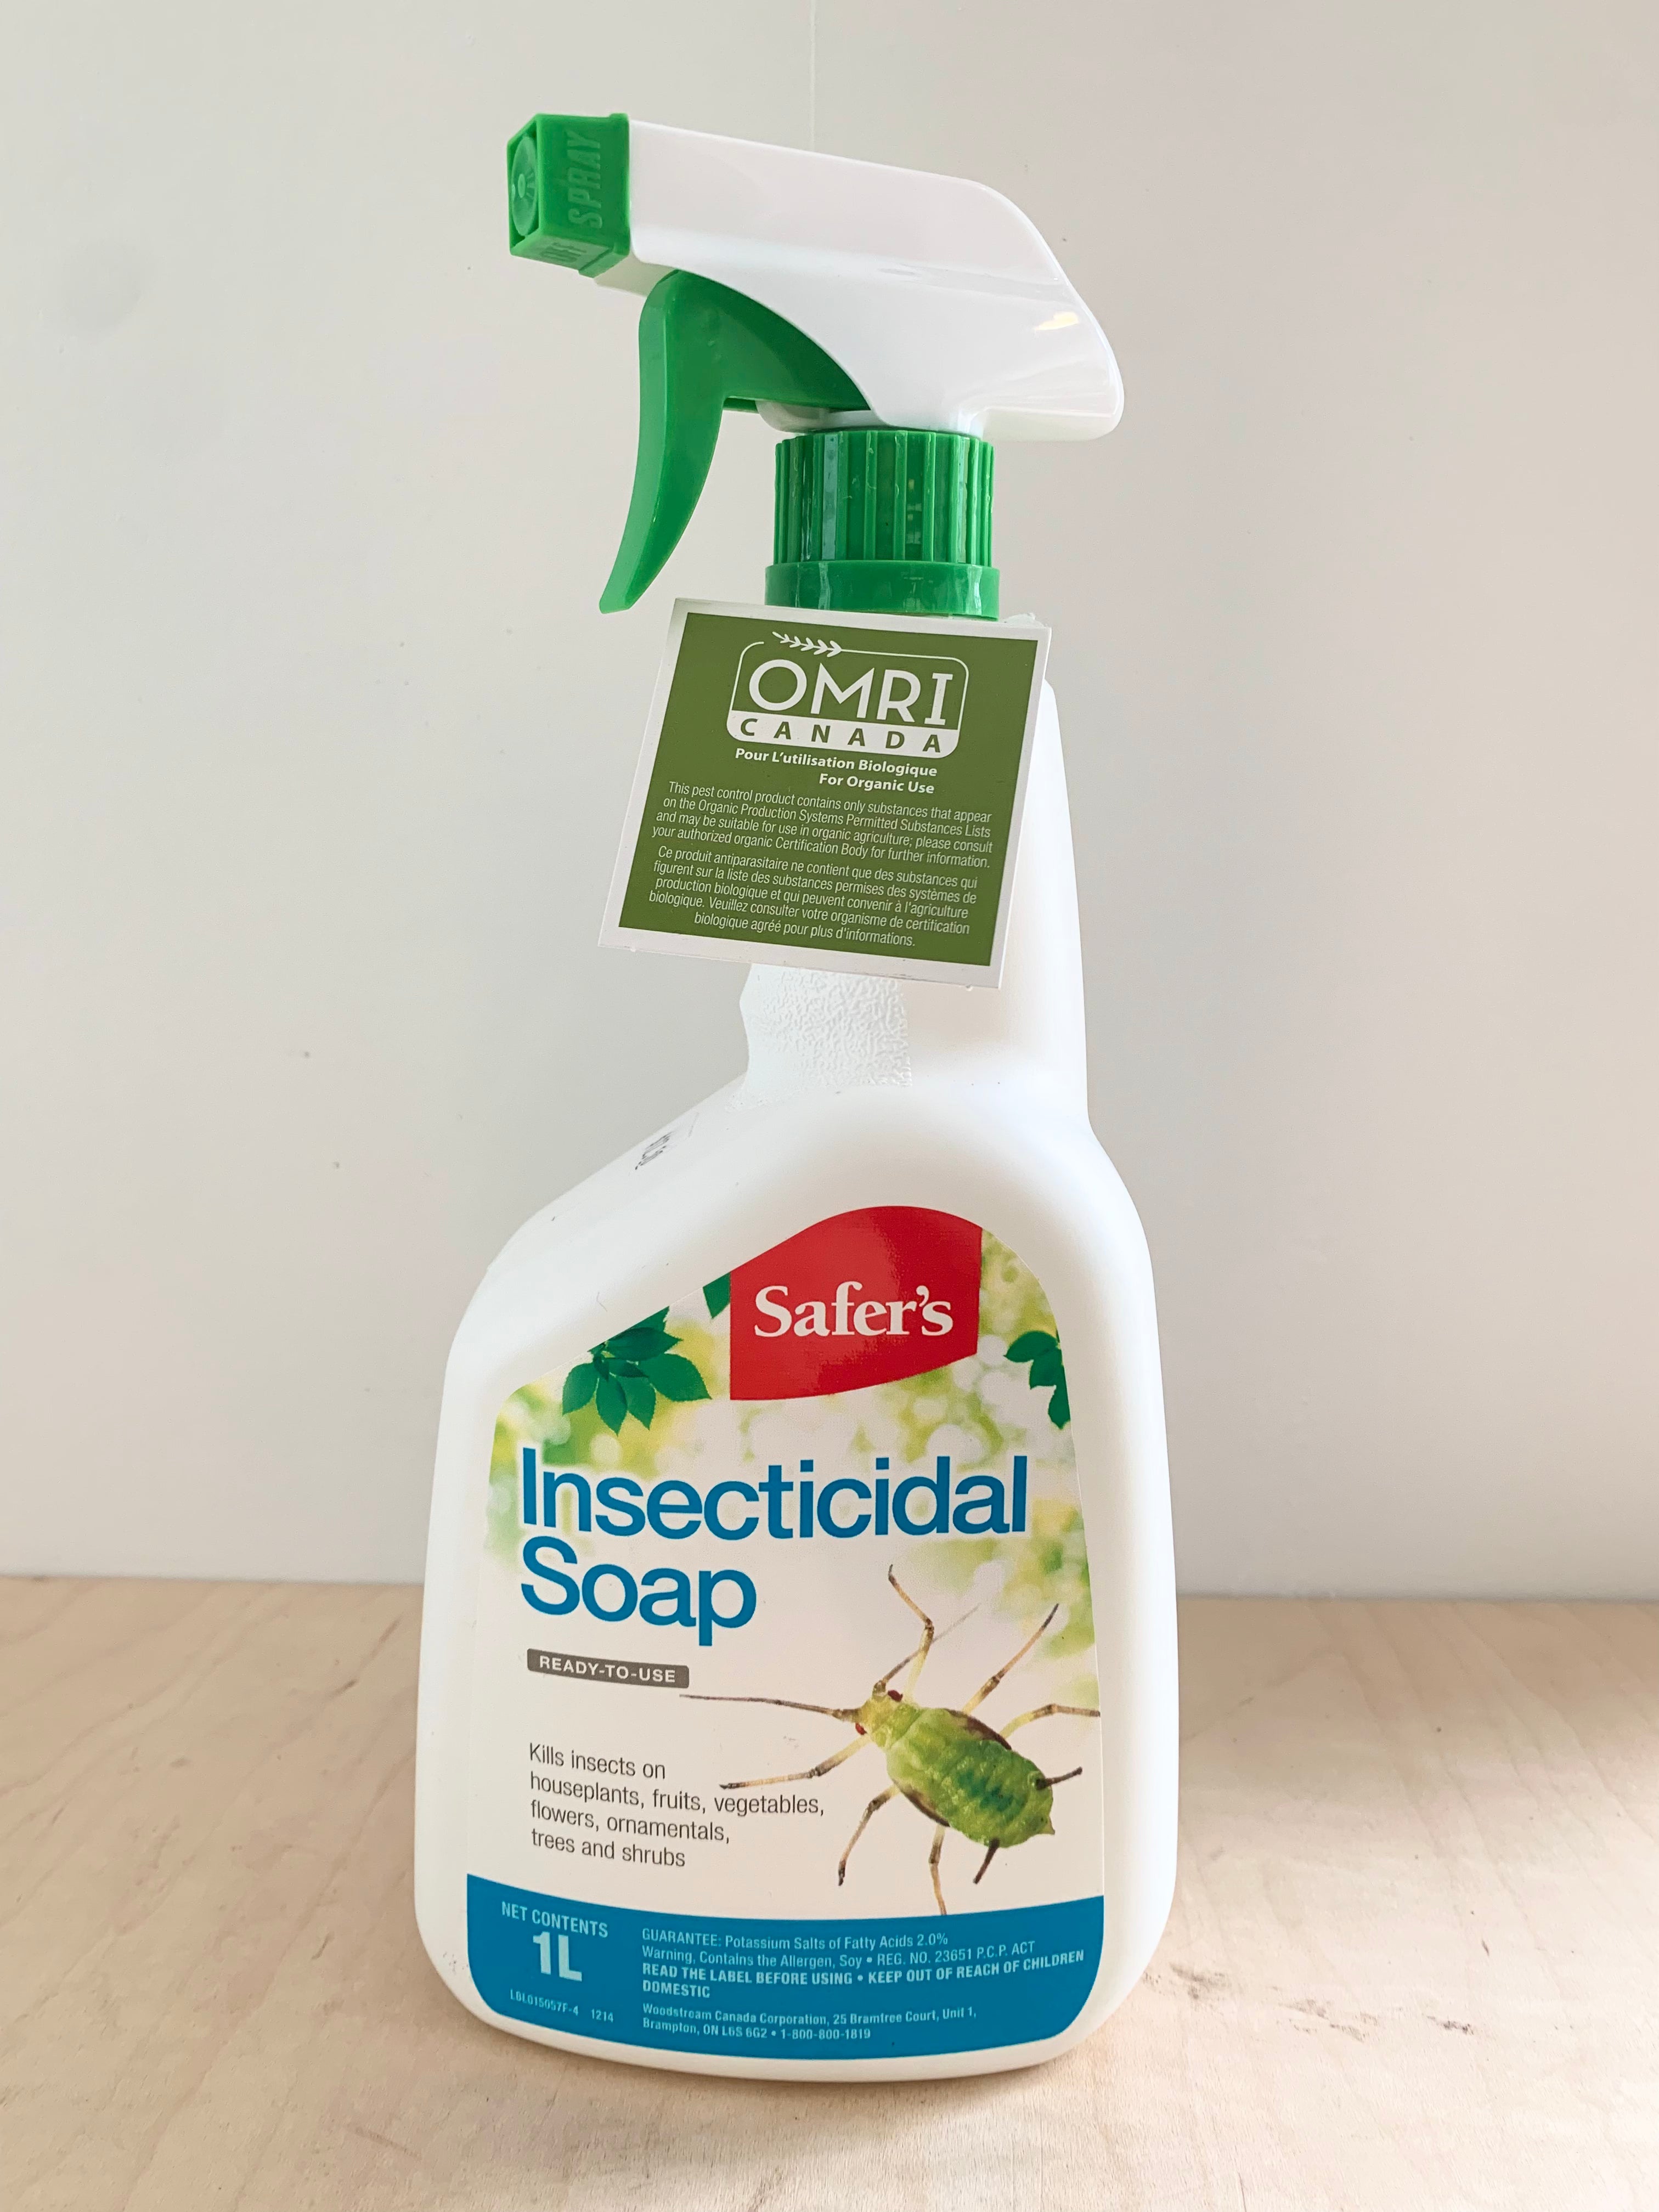 Safers Insecticidal Soap